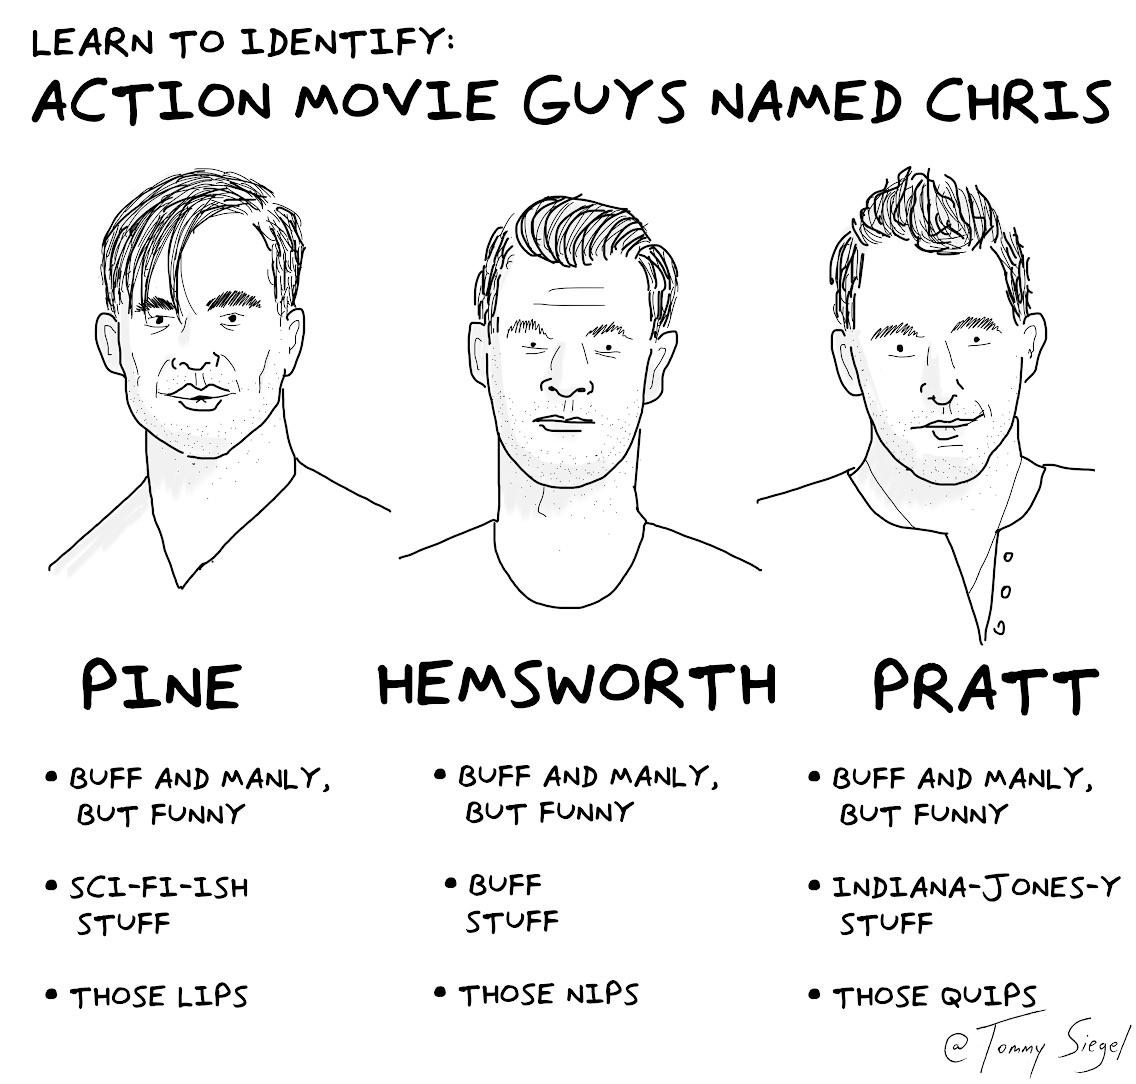 action movie guys named Chris: a guide